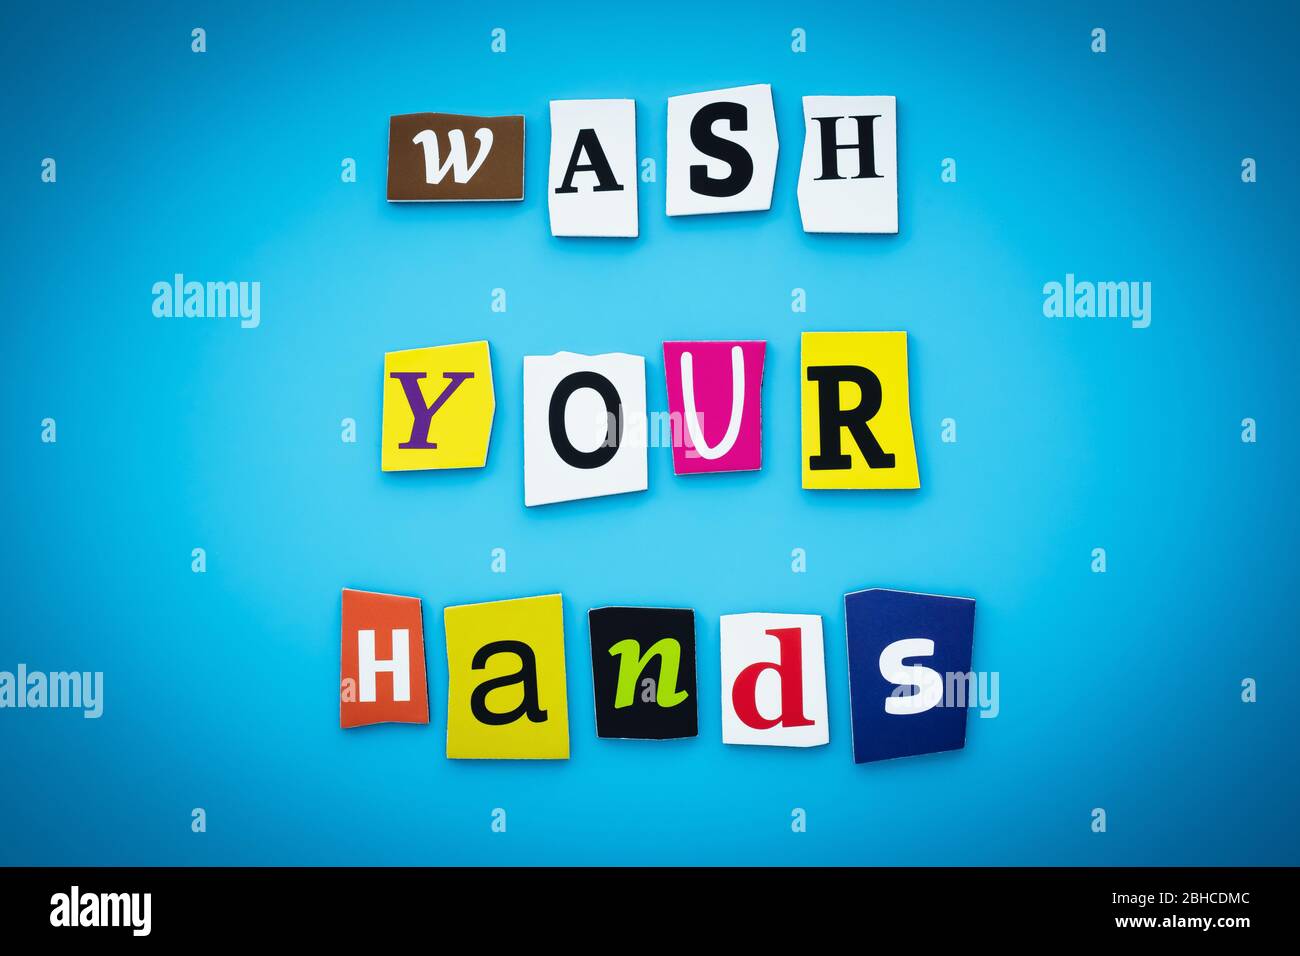 A word writing text - wash your hands. Cut letters on a blue background. Headline, banner with inscription. Coronavirus prevention concept Stock Photo